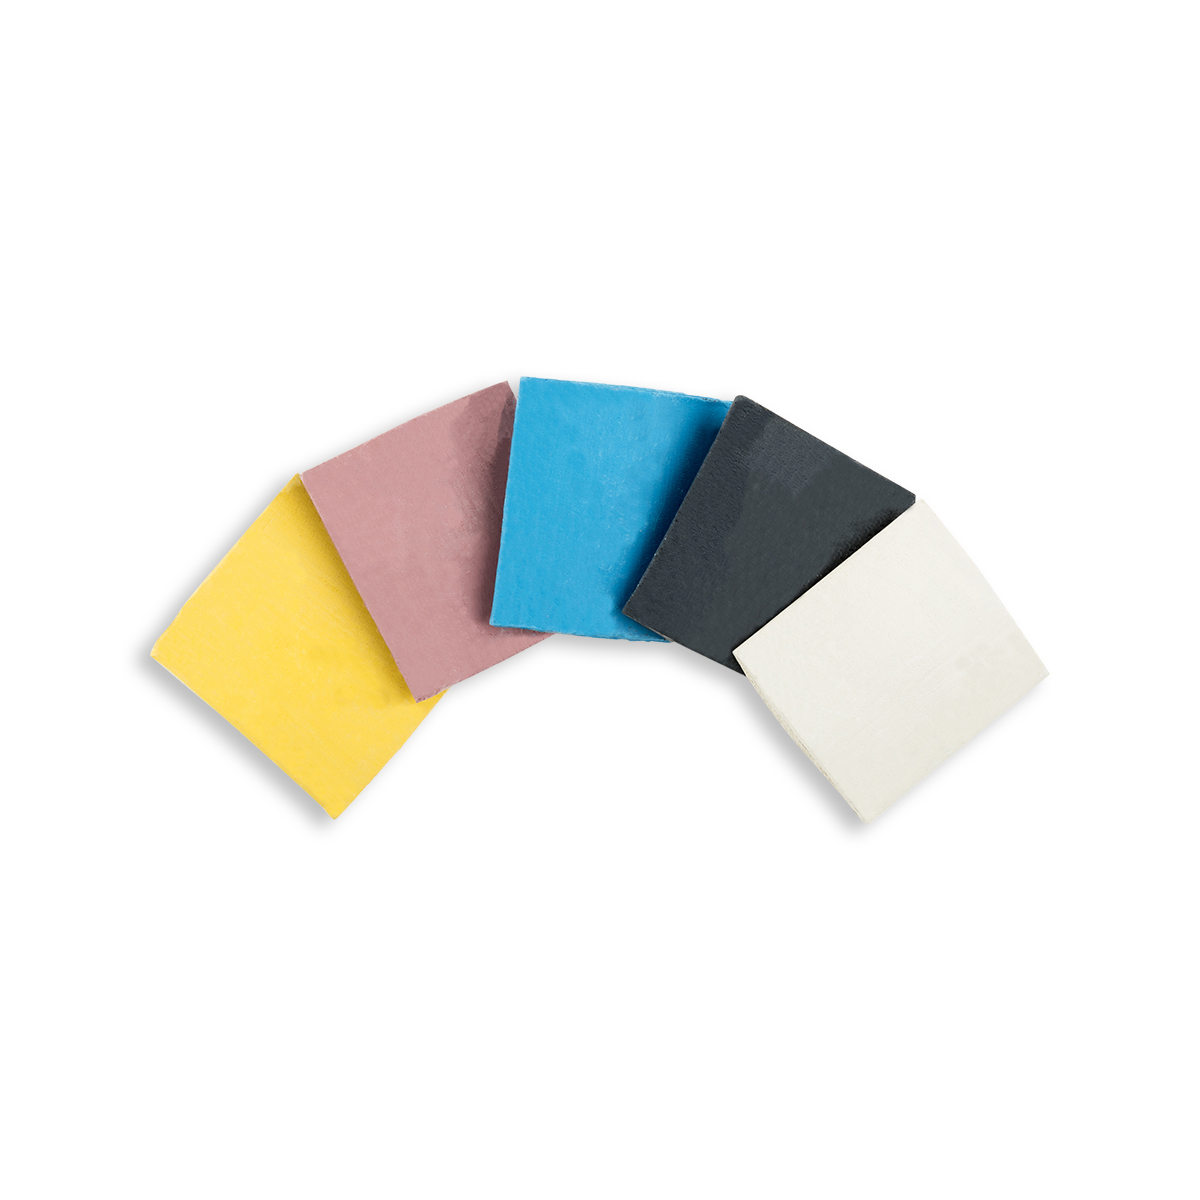 1 Box- Tailor's Chalk Box of 4 colours- blue, white, yellow and